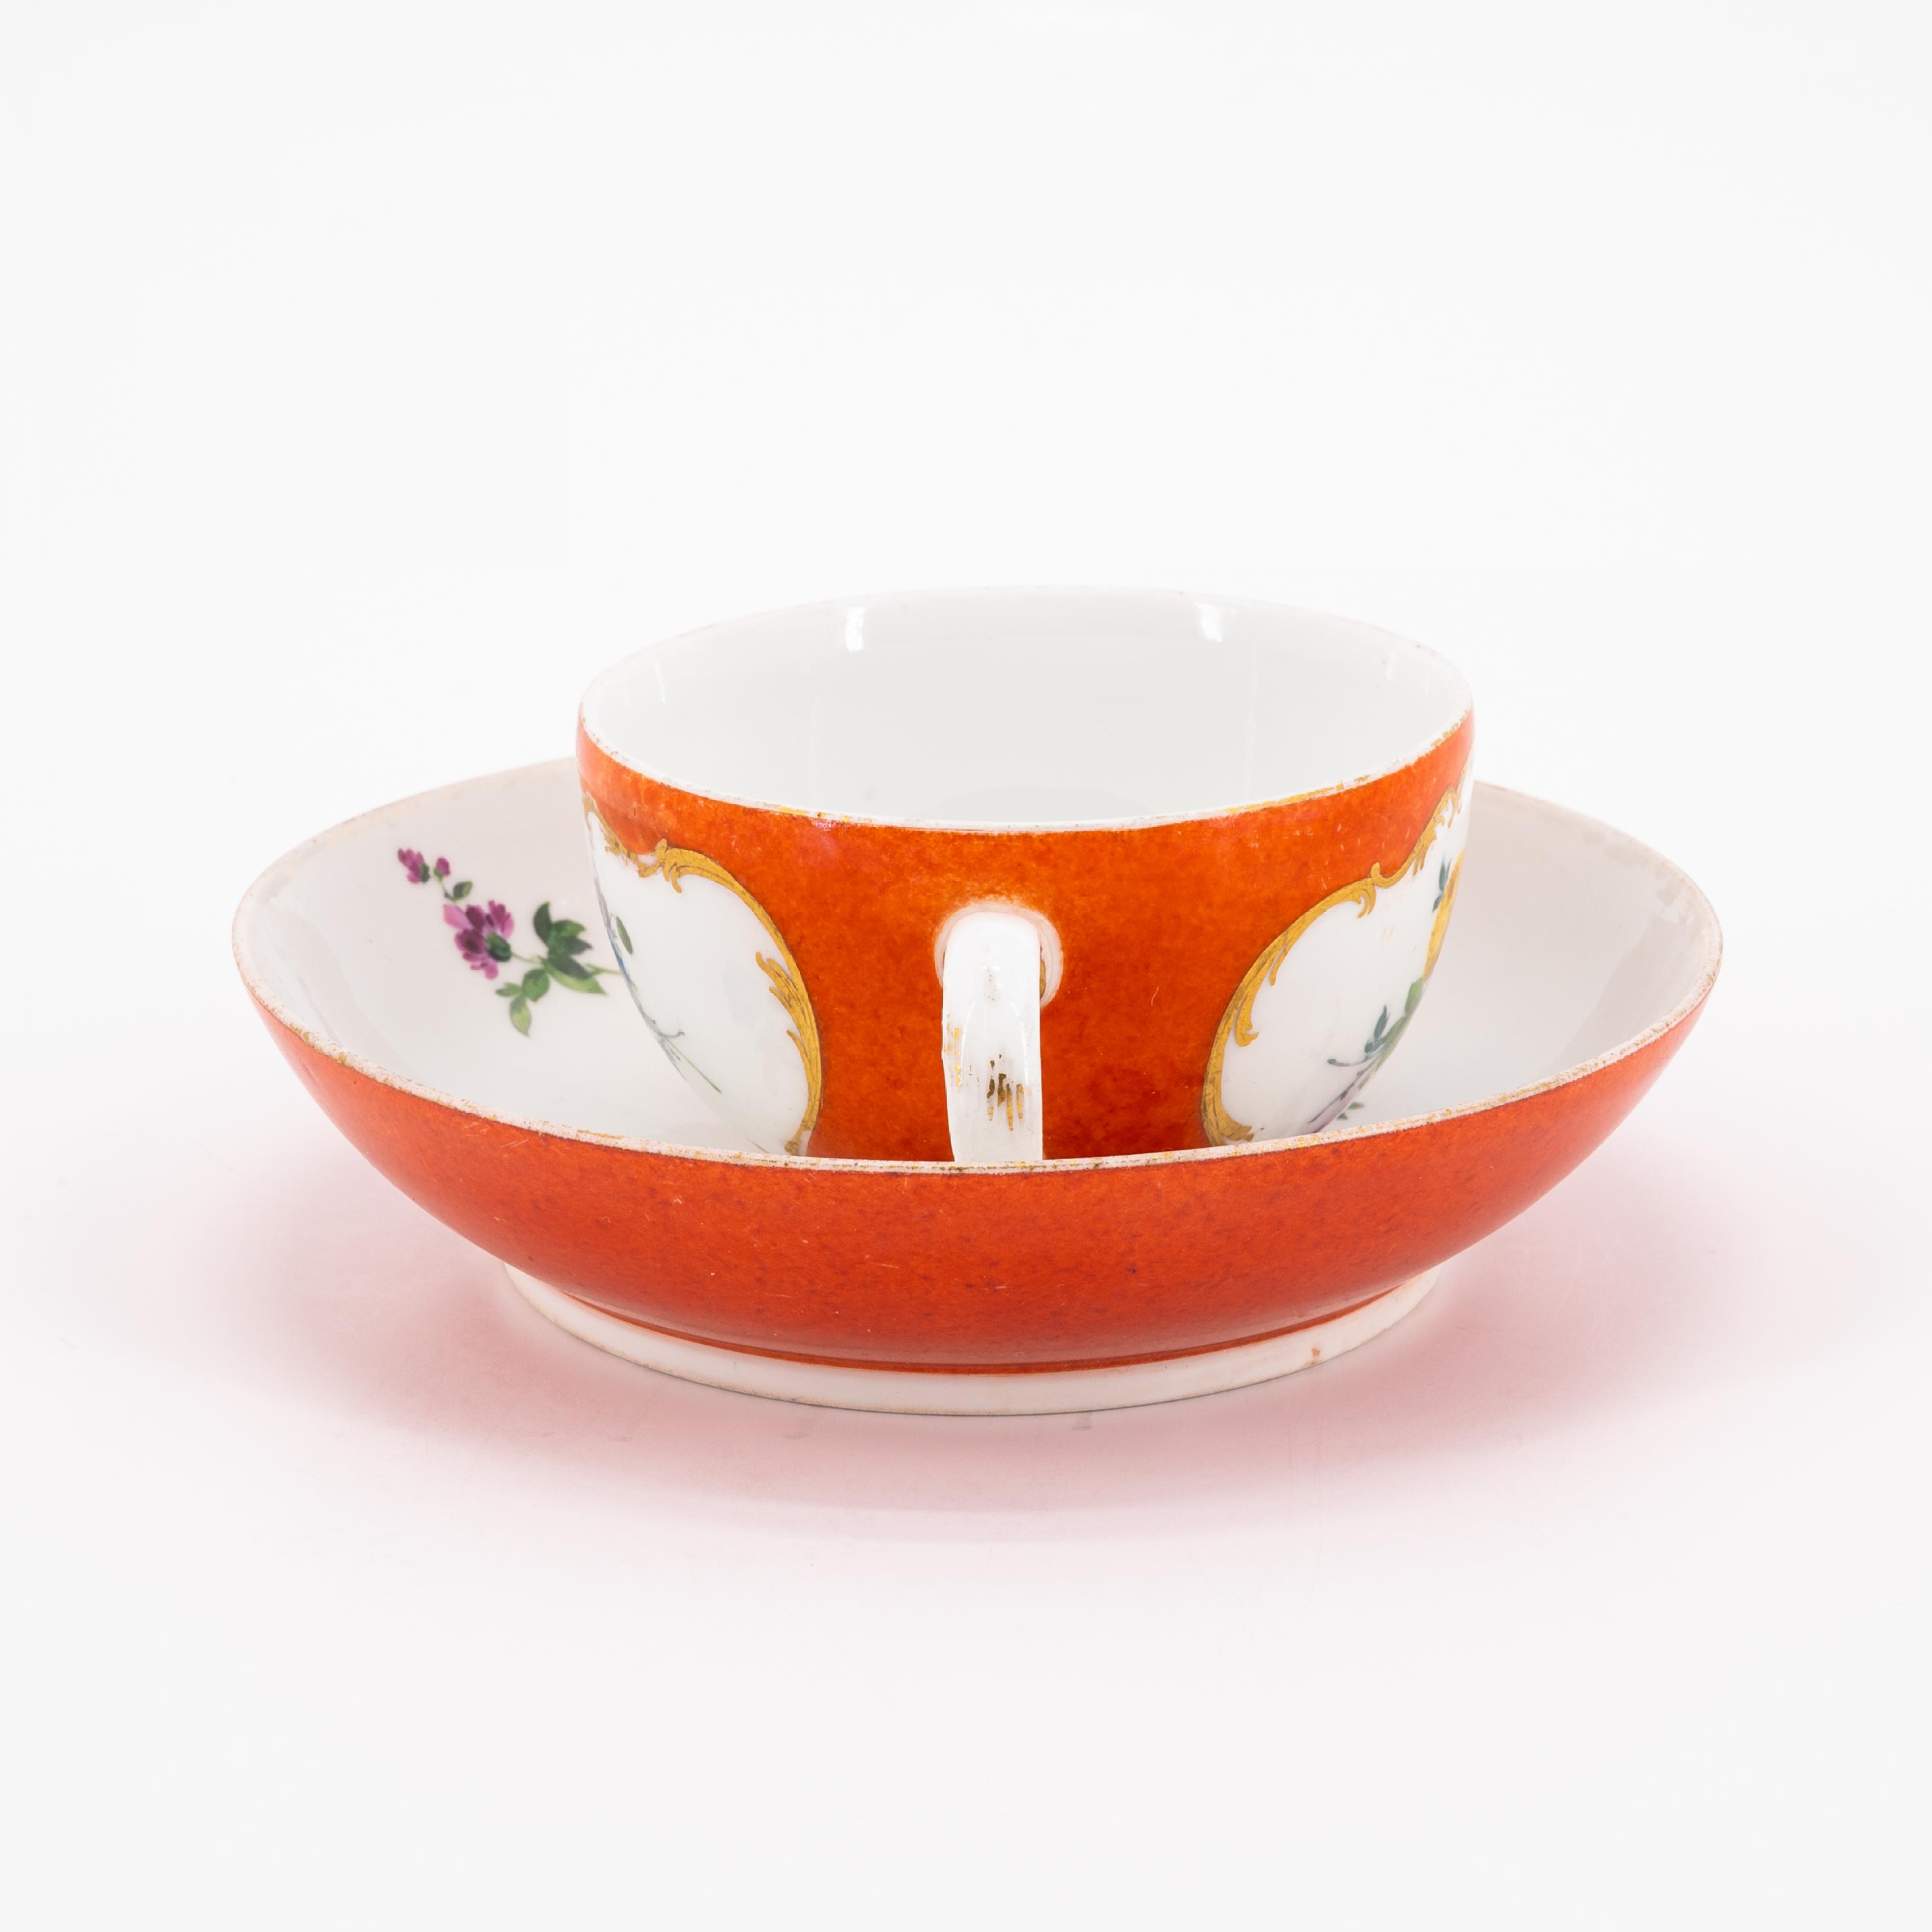 TWO PORCELAIN CUPS AND SAUCERS WITH YELLOW AND ORANGE COLOURED GROUND AS WELL AS FLORAL DECOR - Image 7 of 11